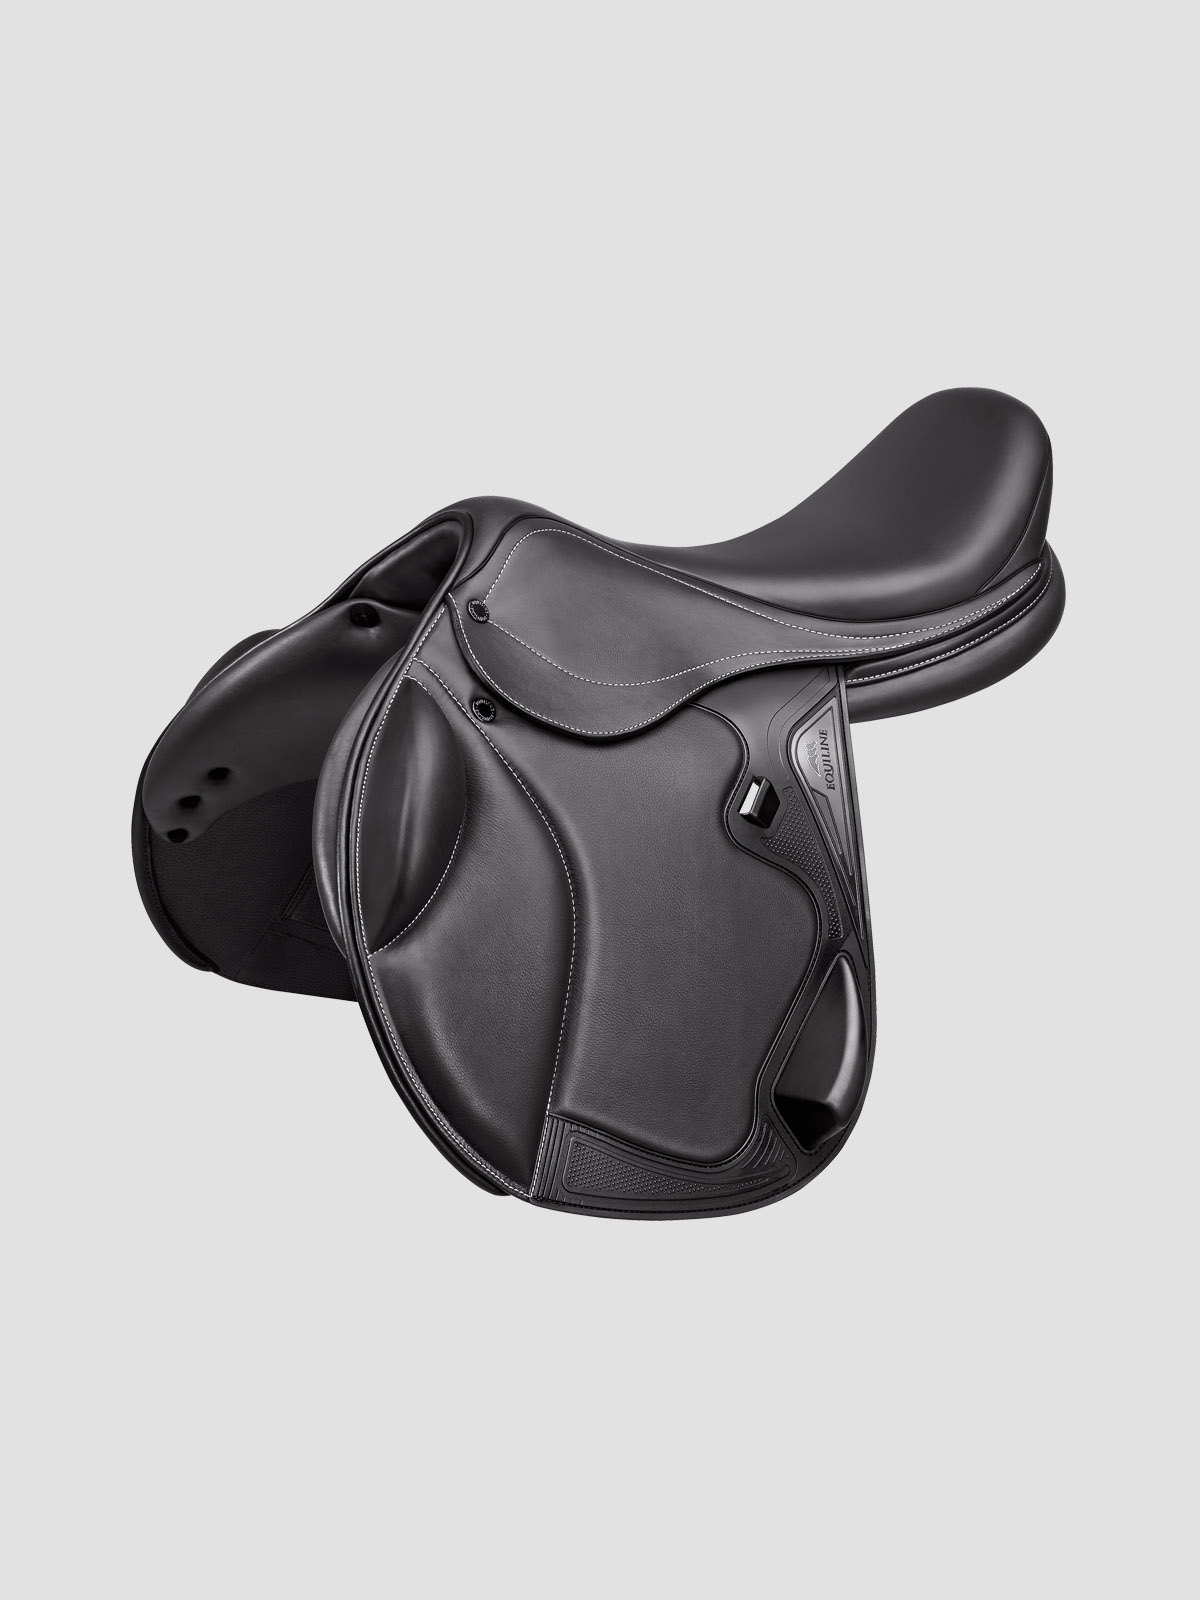 EQUILINE CROSS JUMPING SADDLE 2